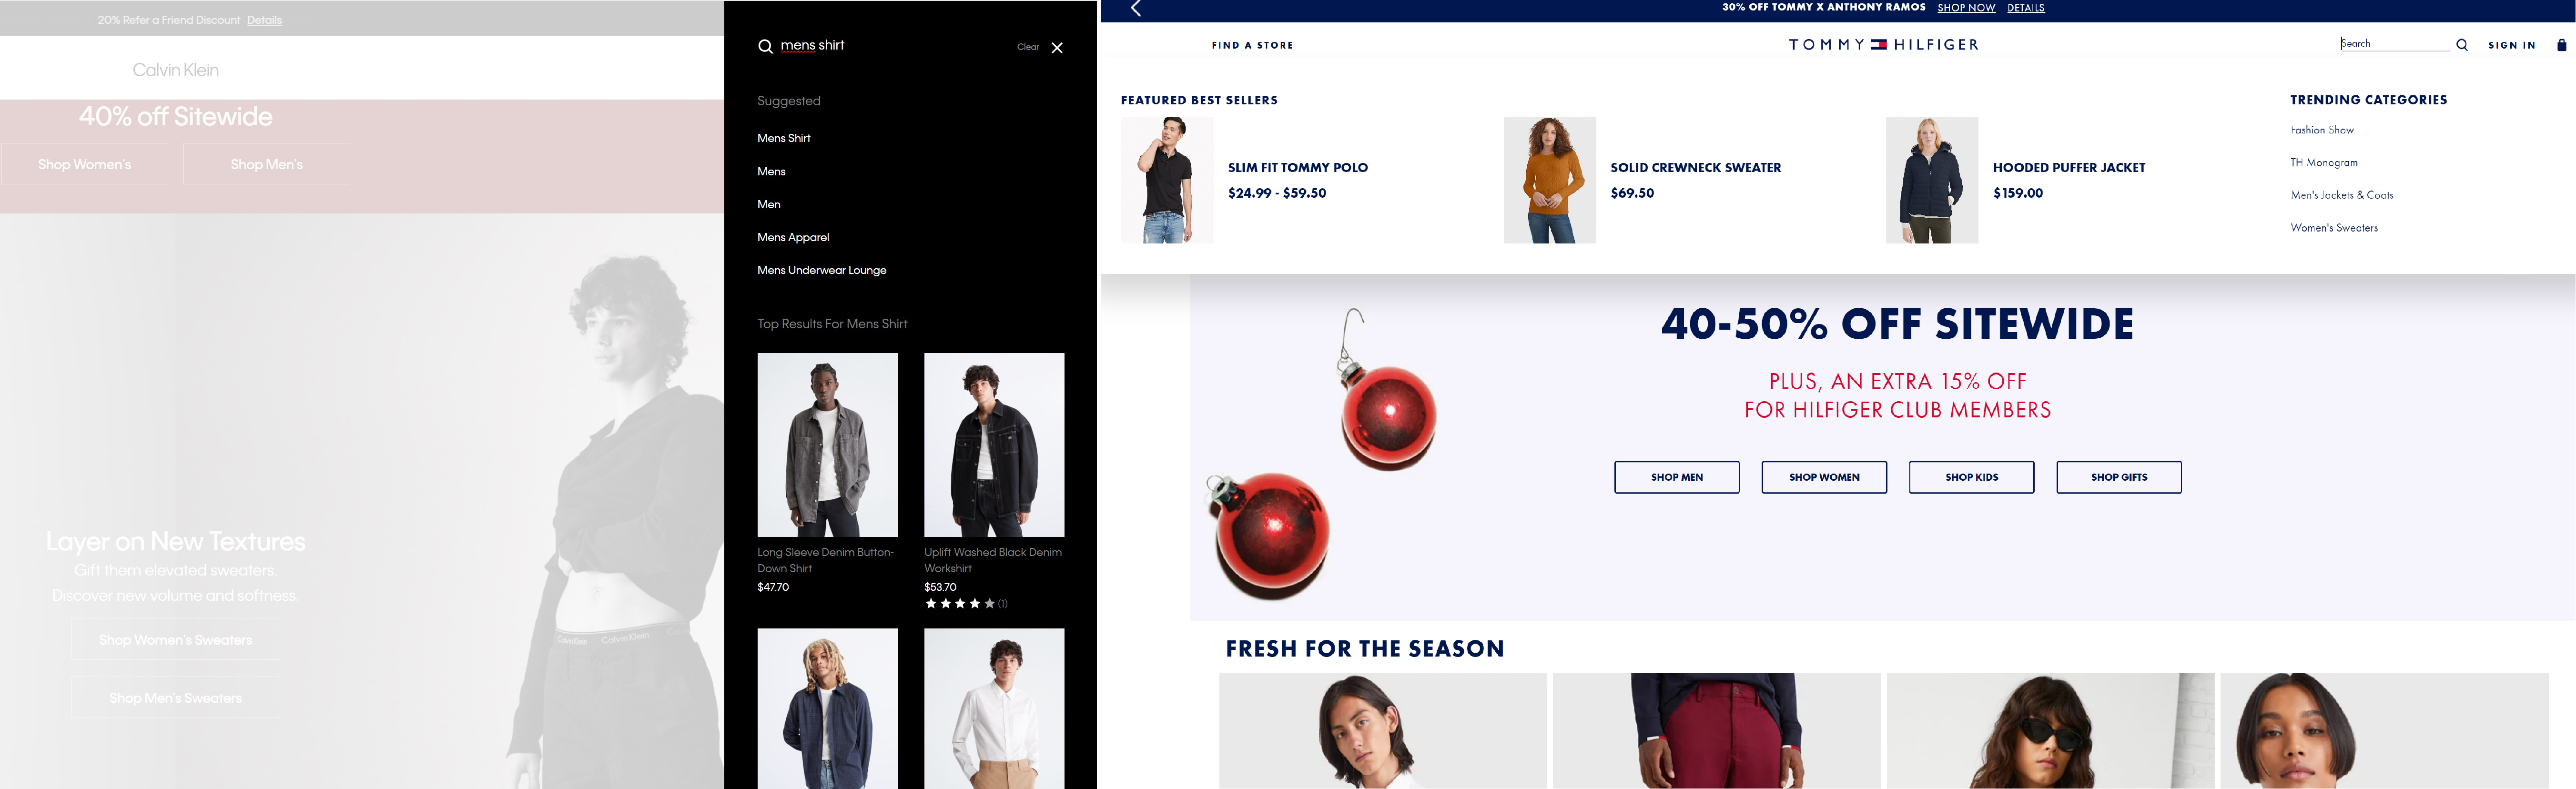 Calvin Klein & Tommy Site Search Redesign